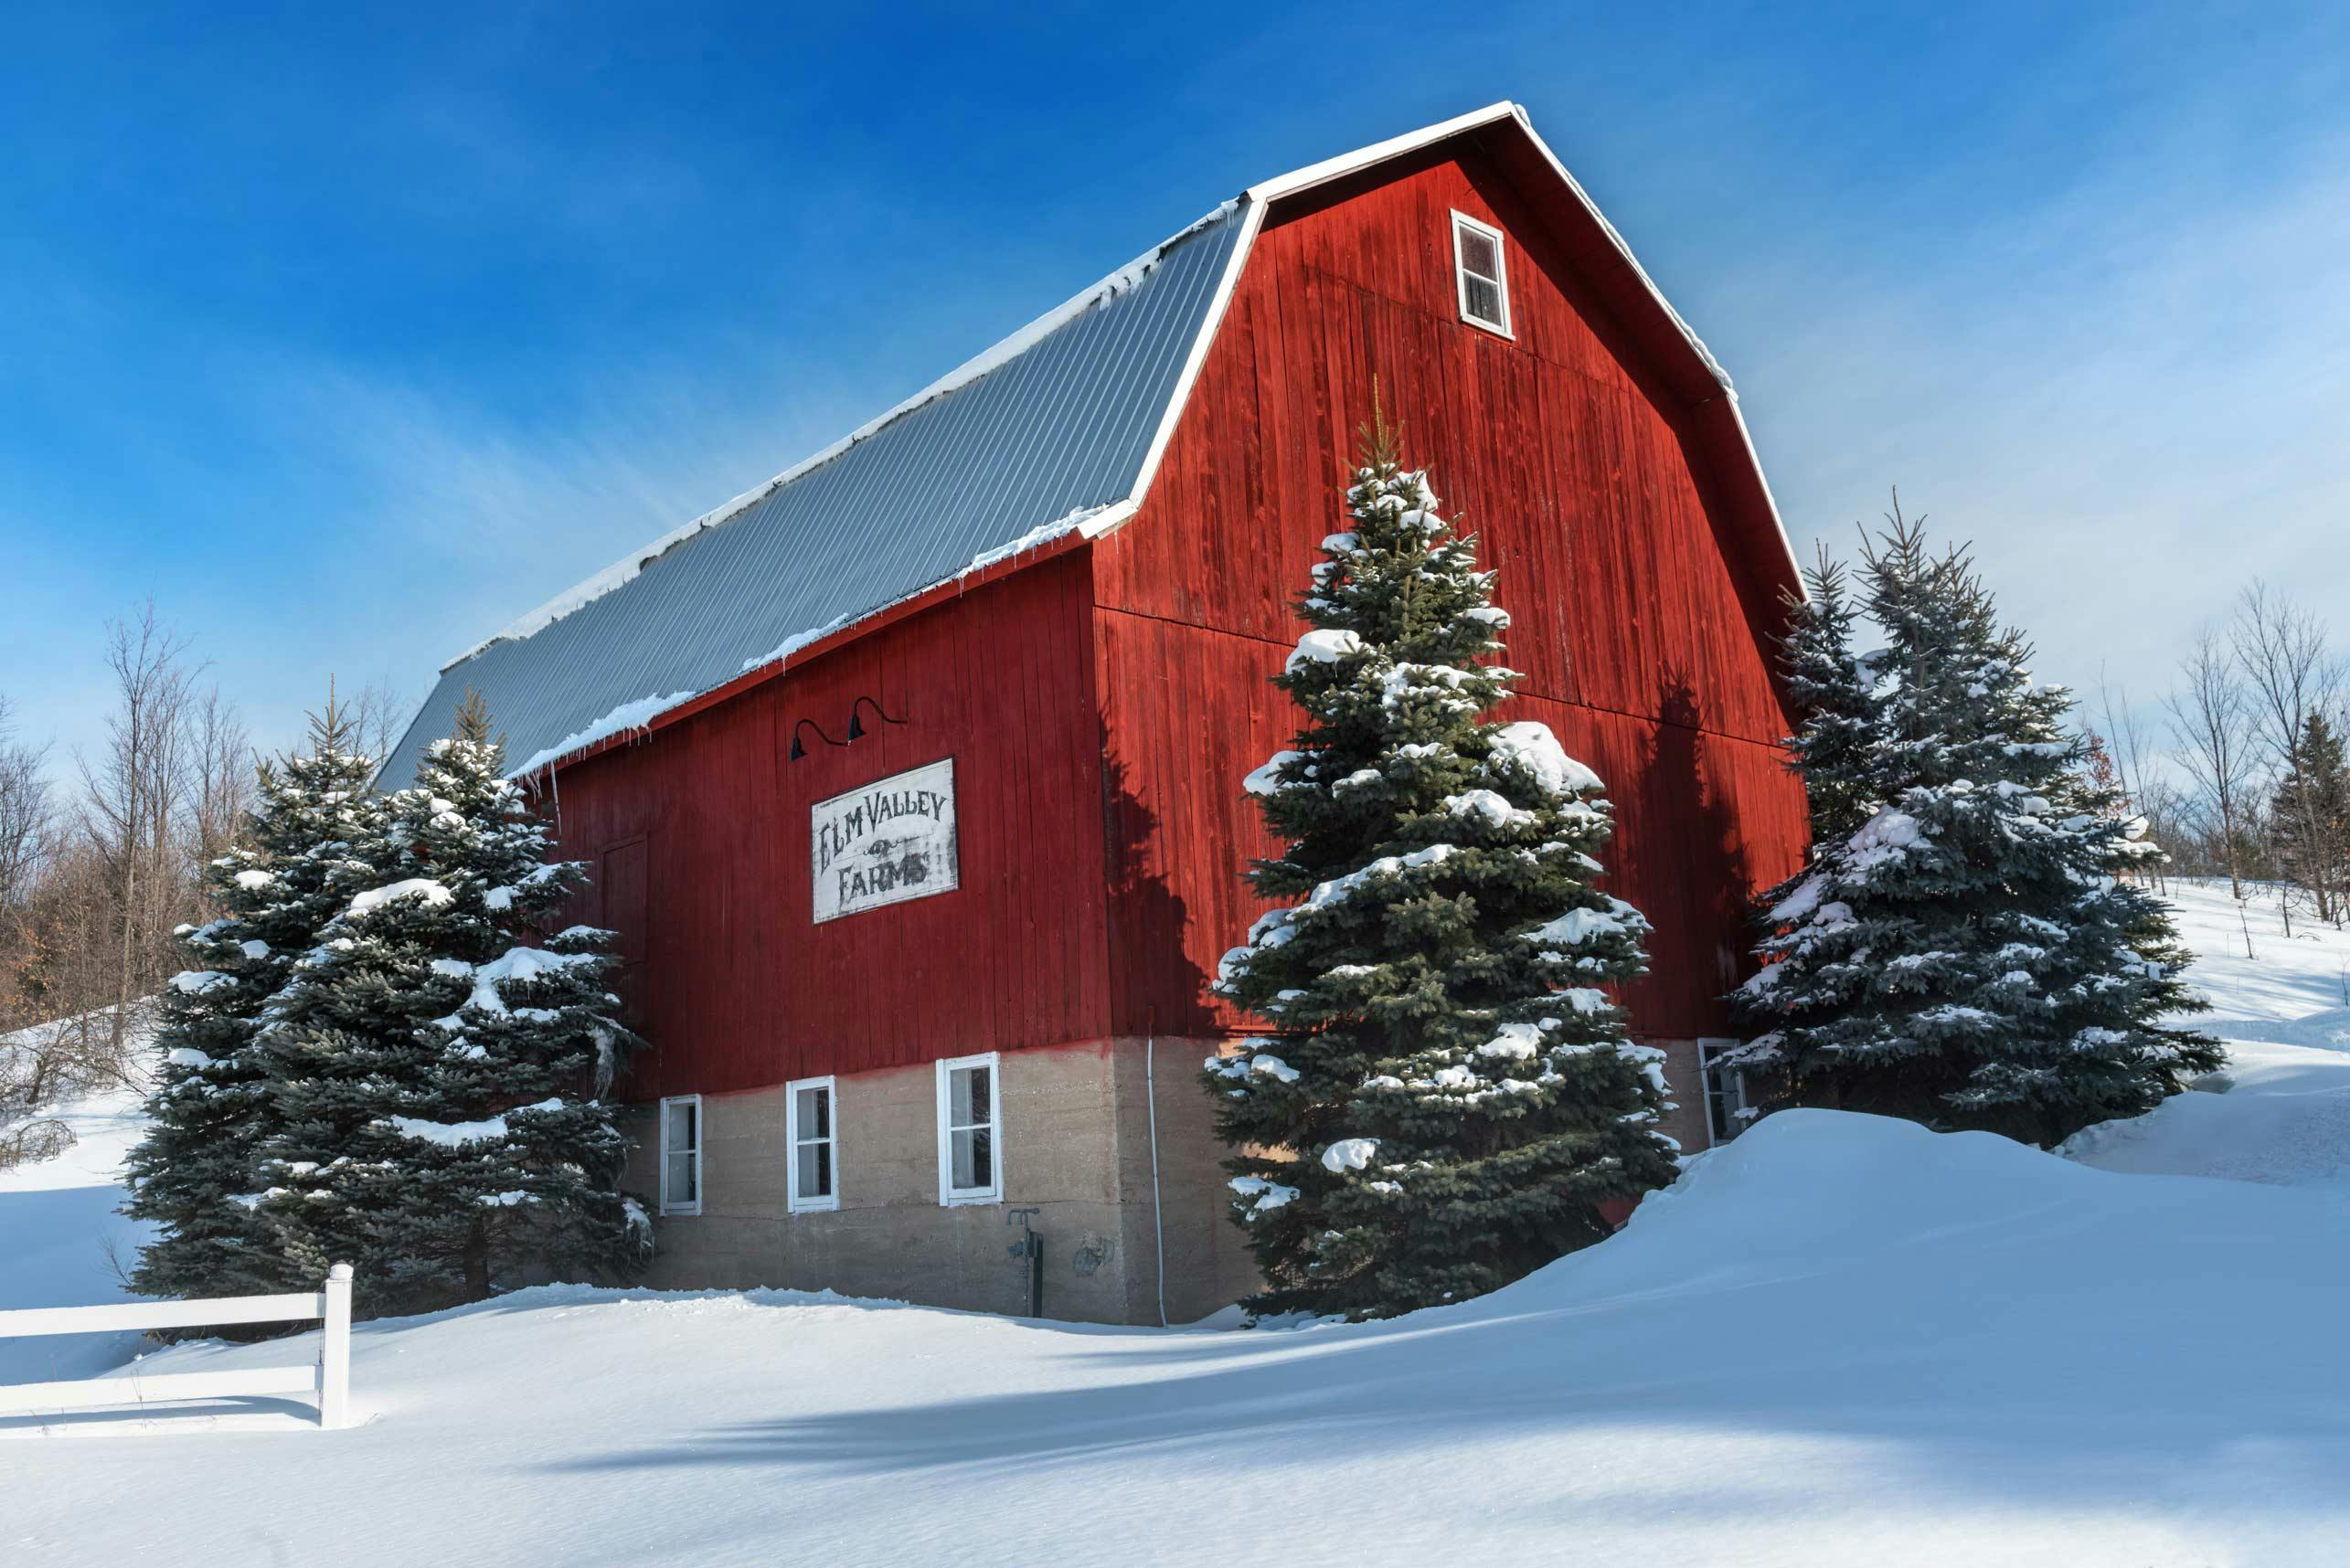 Elm Valley Farms Red Barn & Pine Trees